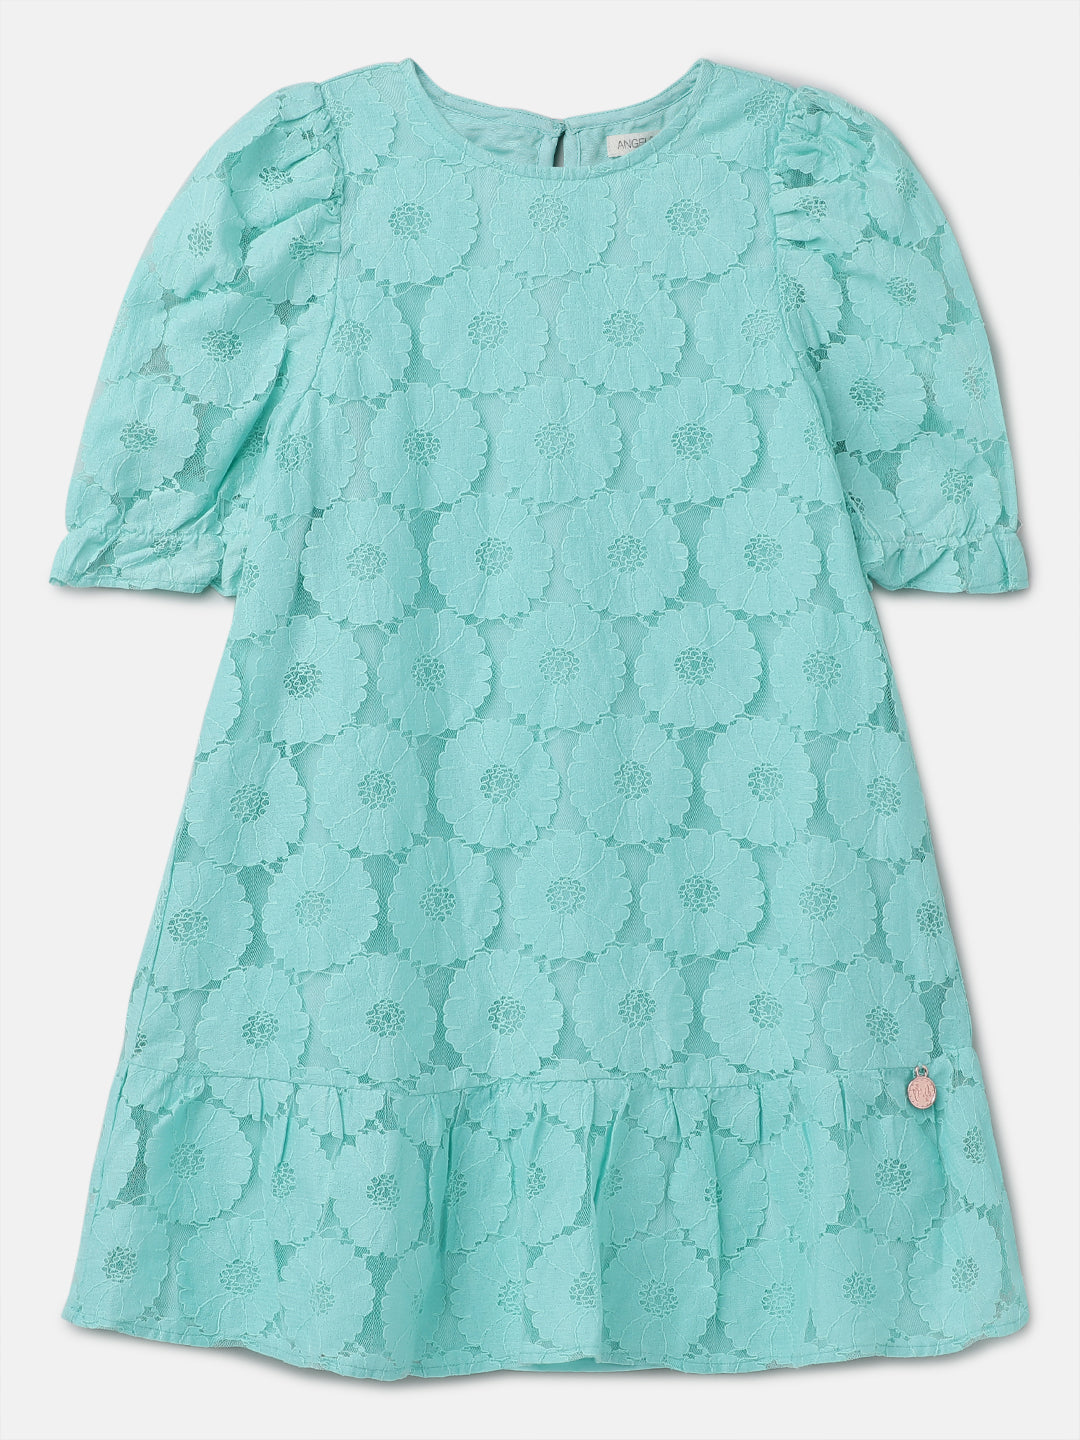 Girls Green Floral Printed Lace Dress